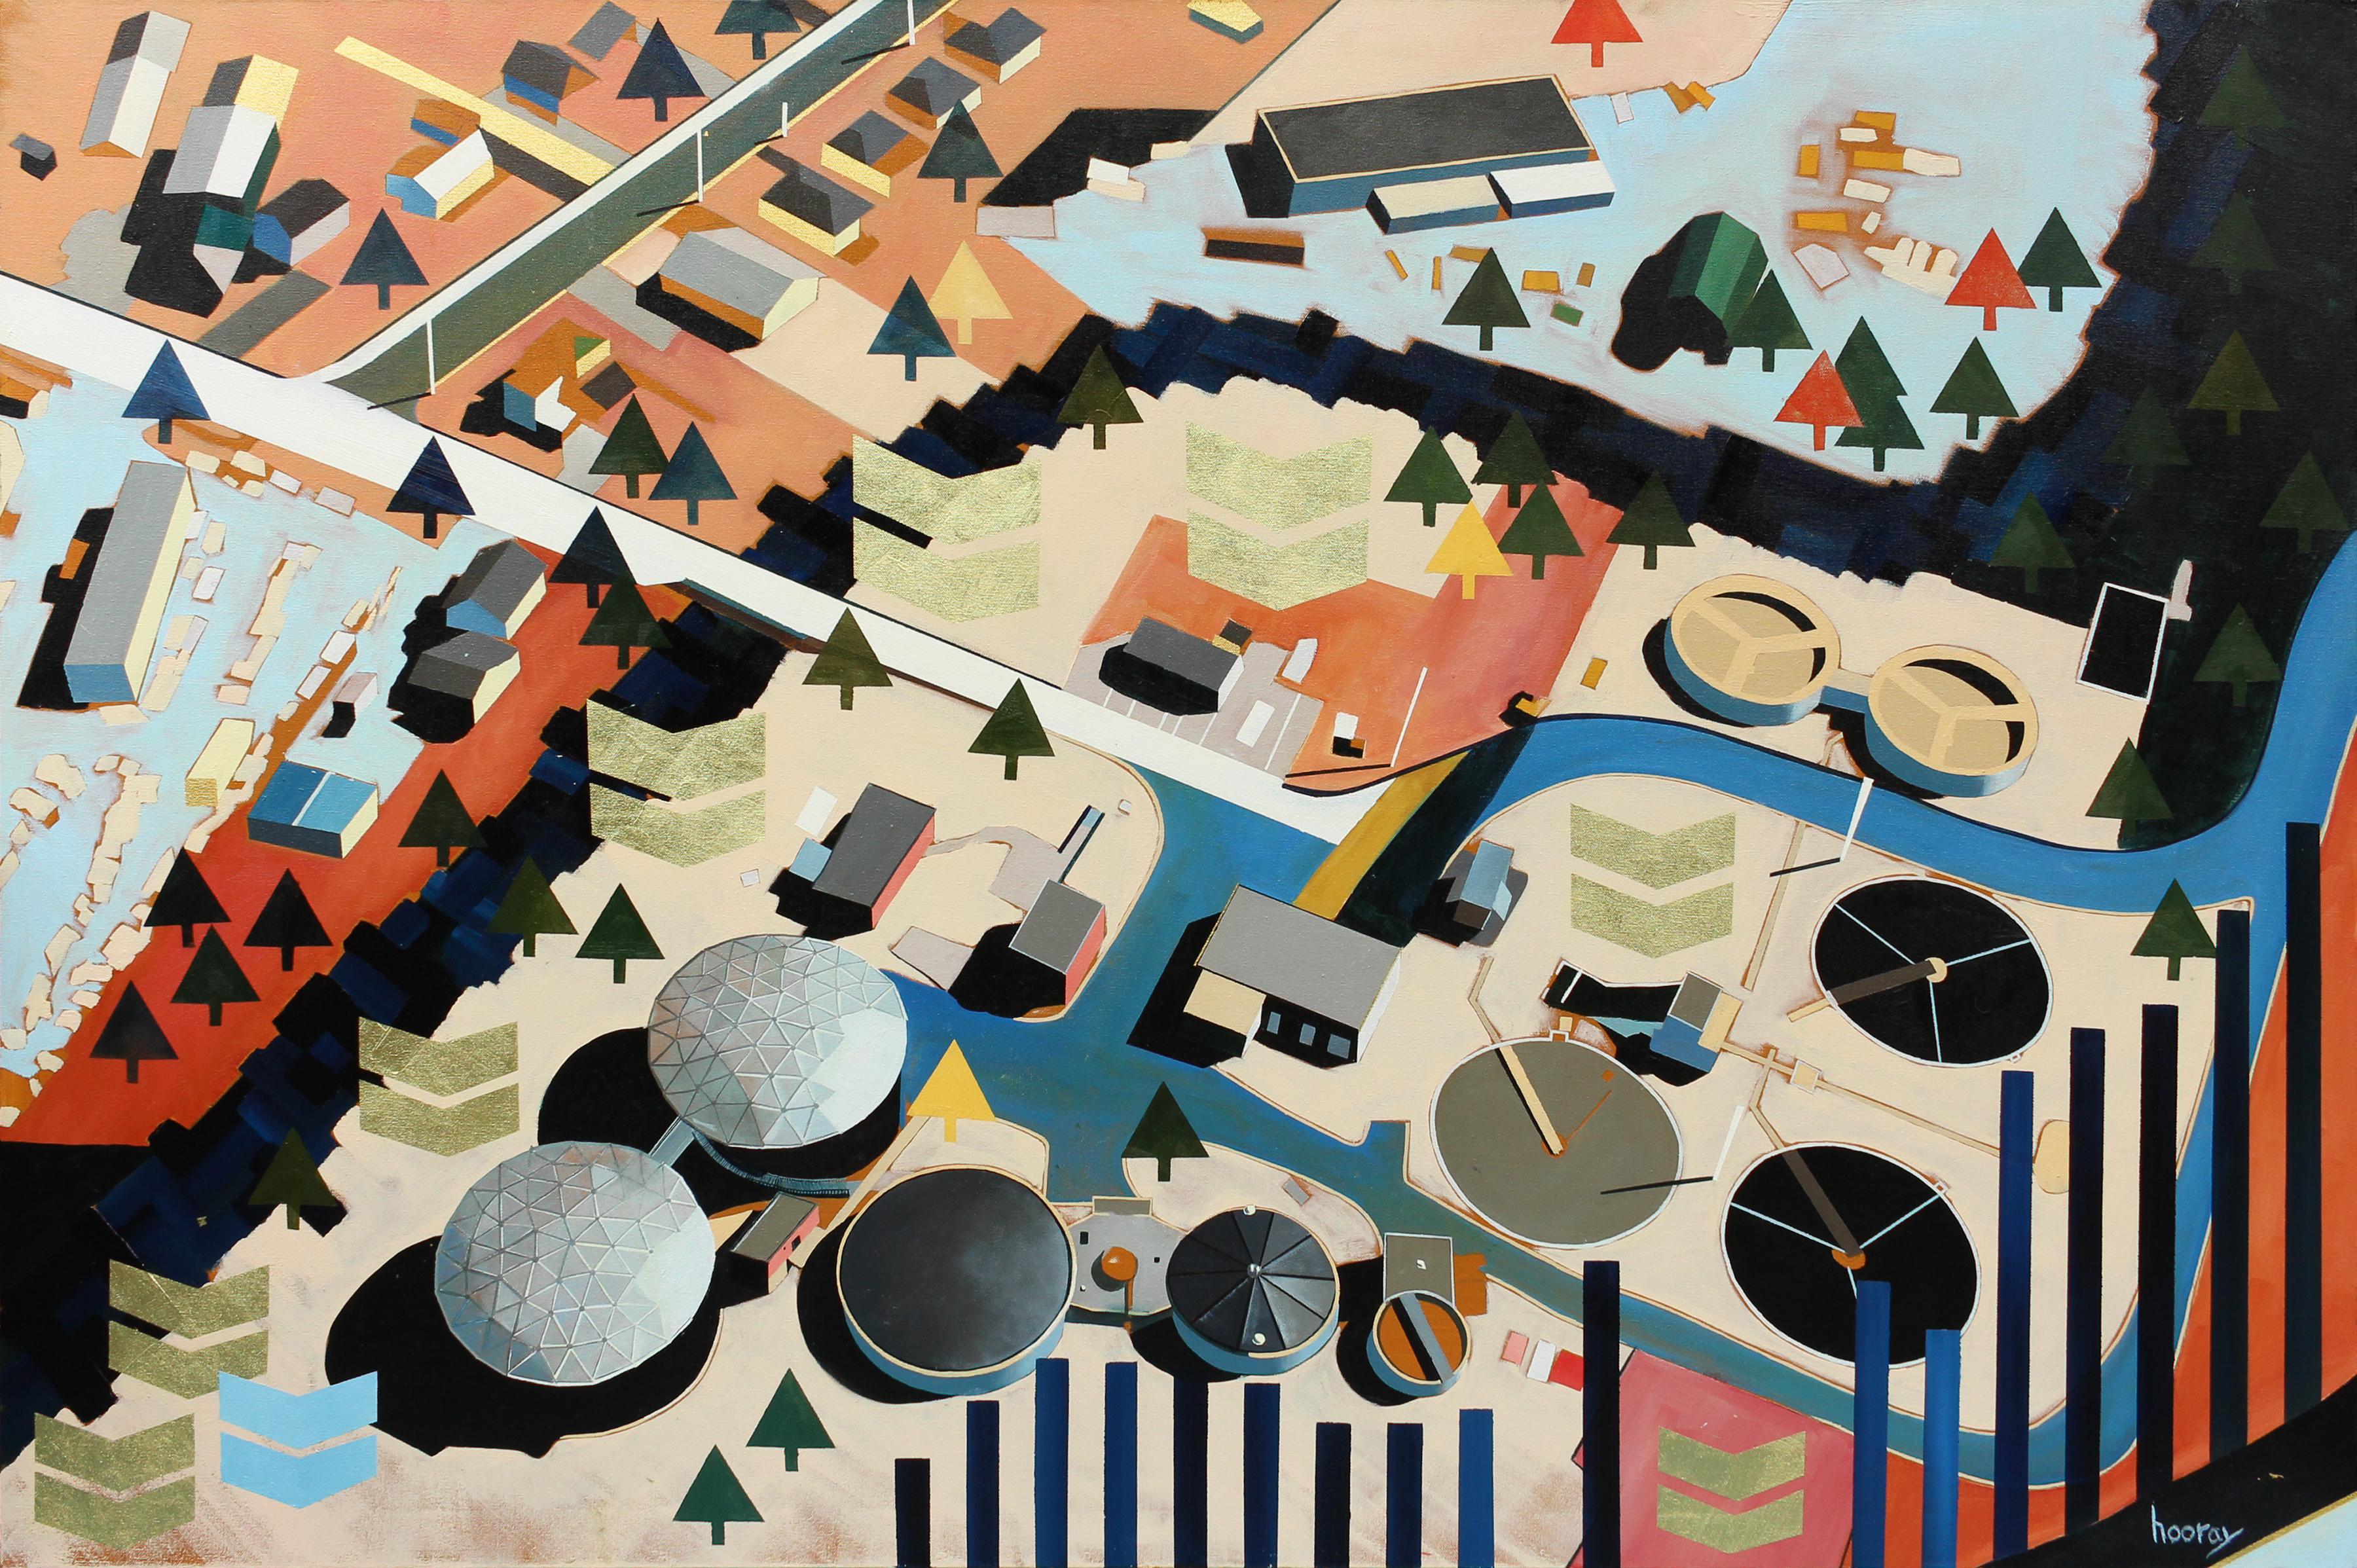 "Business is Business" Contemporary Aerial Landscape Paintings - Hilma af Klint